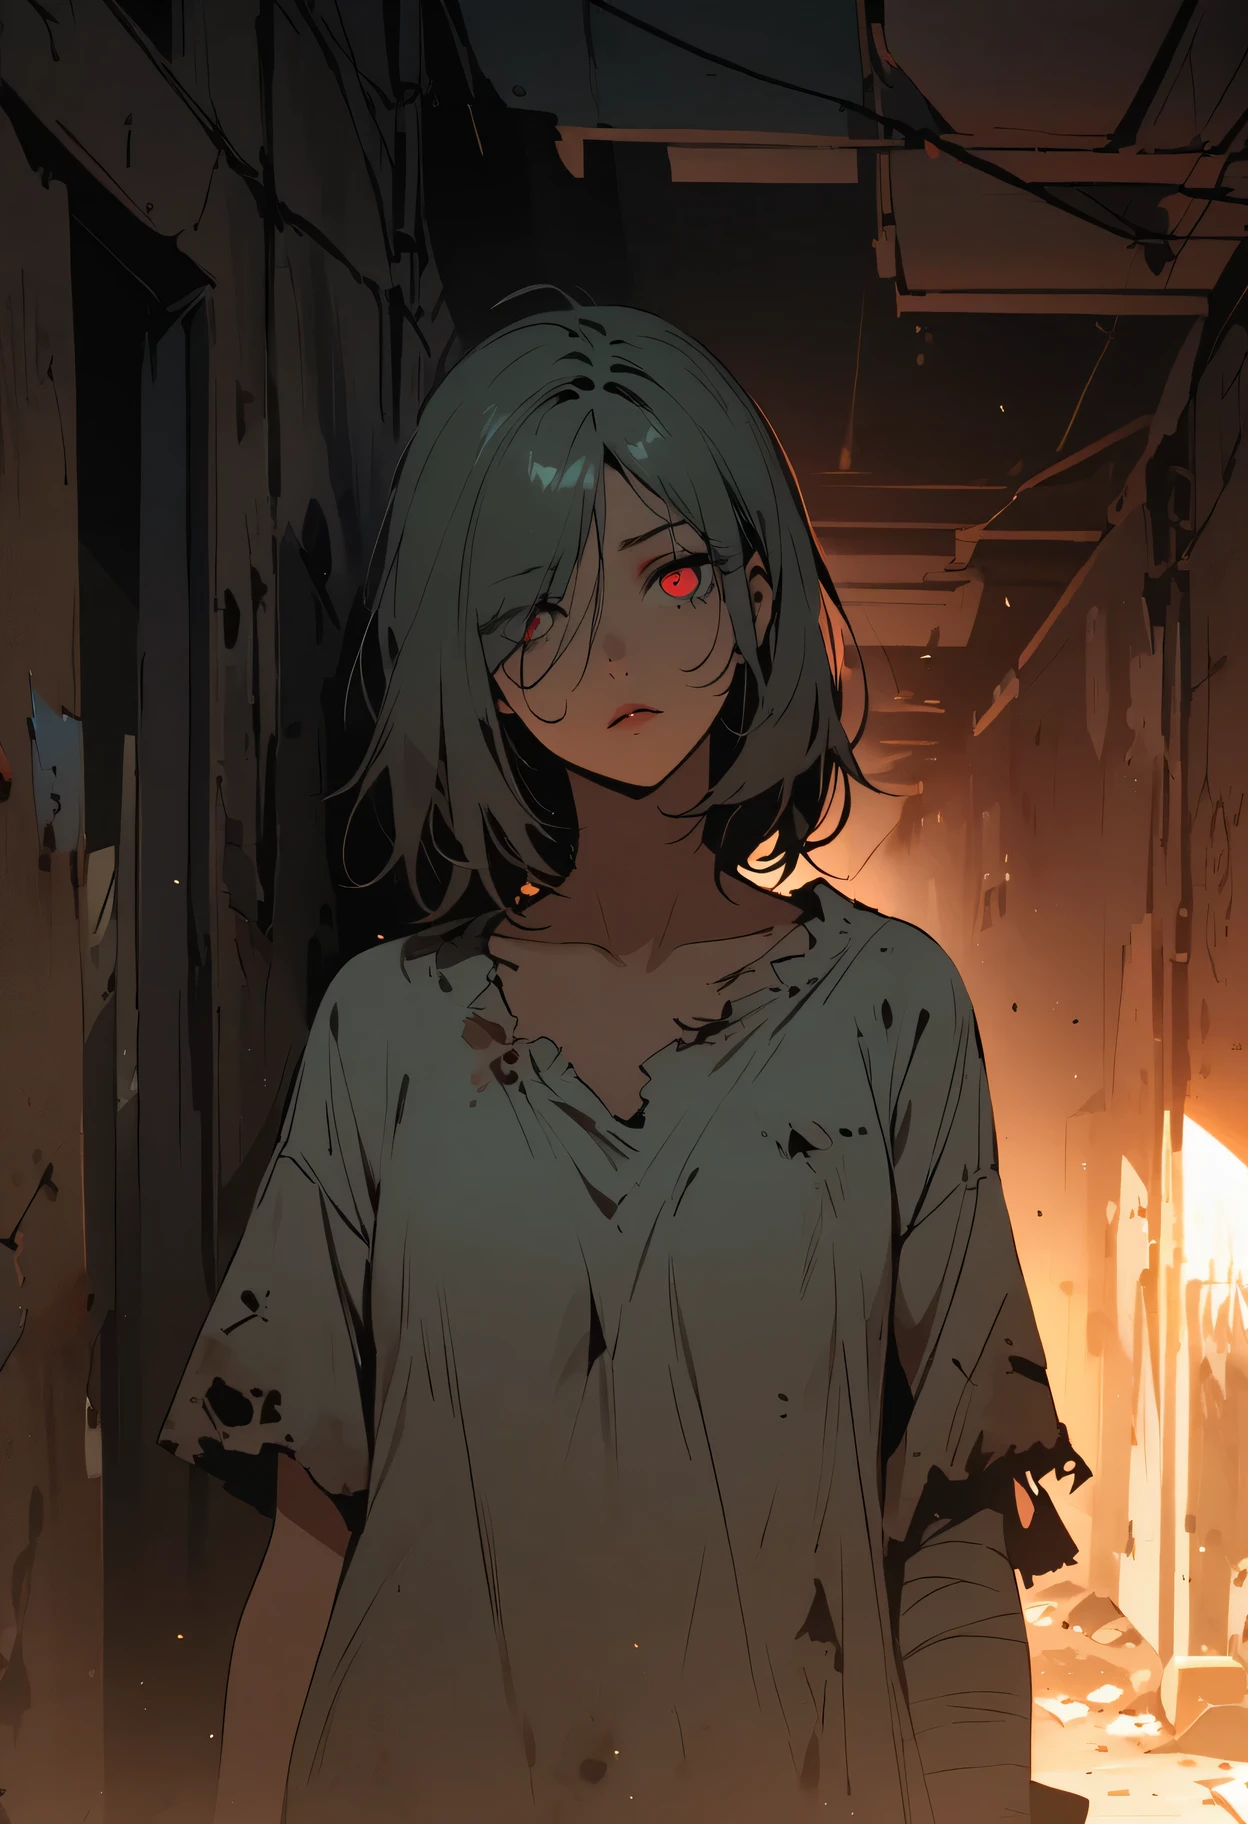 dark - comic-style:post-apocalyptic wasteland,desolate hospital,barren landscape,dusty atmosphere,overgrown with weeds,ruined buildings,crumbling walls,A girl wearing worn-out nurse uniform who was injured,a stretcher,abandoned medical equipment,flickering dim lights,shattered windows,faint sunlight peeking through the cracks,silence interrupted by distant echoes,decaying furniture and belongings,mysterious medical experiments,hauntingly beautiful,empty corridors and hallways,dirty bandages,makeshift bandages,muted colors,ominous clouds in the sky,ruined cityscape in the background,hope in her eyes,scattered papers and documents,decipherable symbols on the walls,evocative art style,contrast between destruction and resilience,heart-wrenching story hidden within the scene